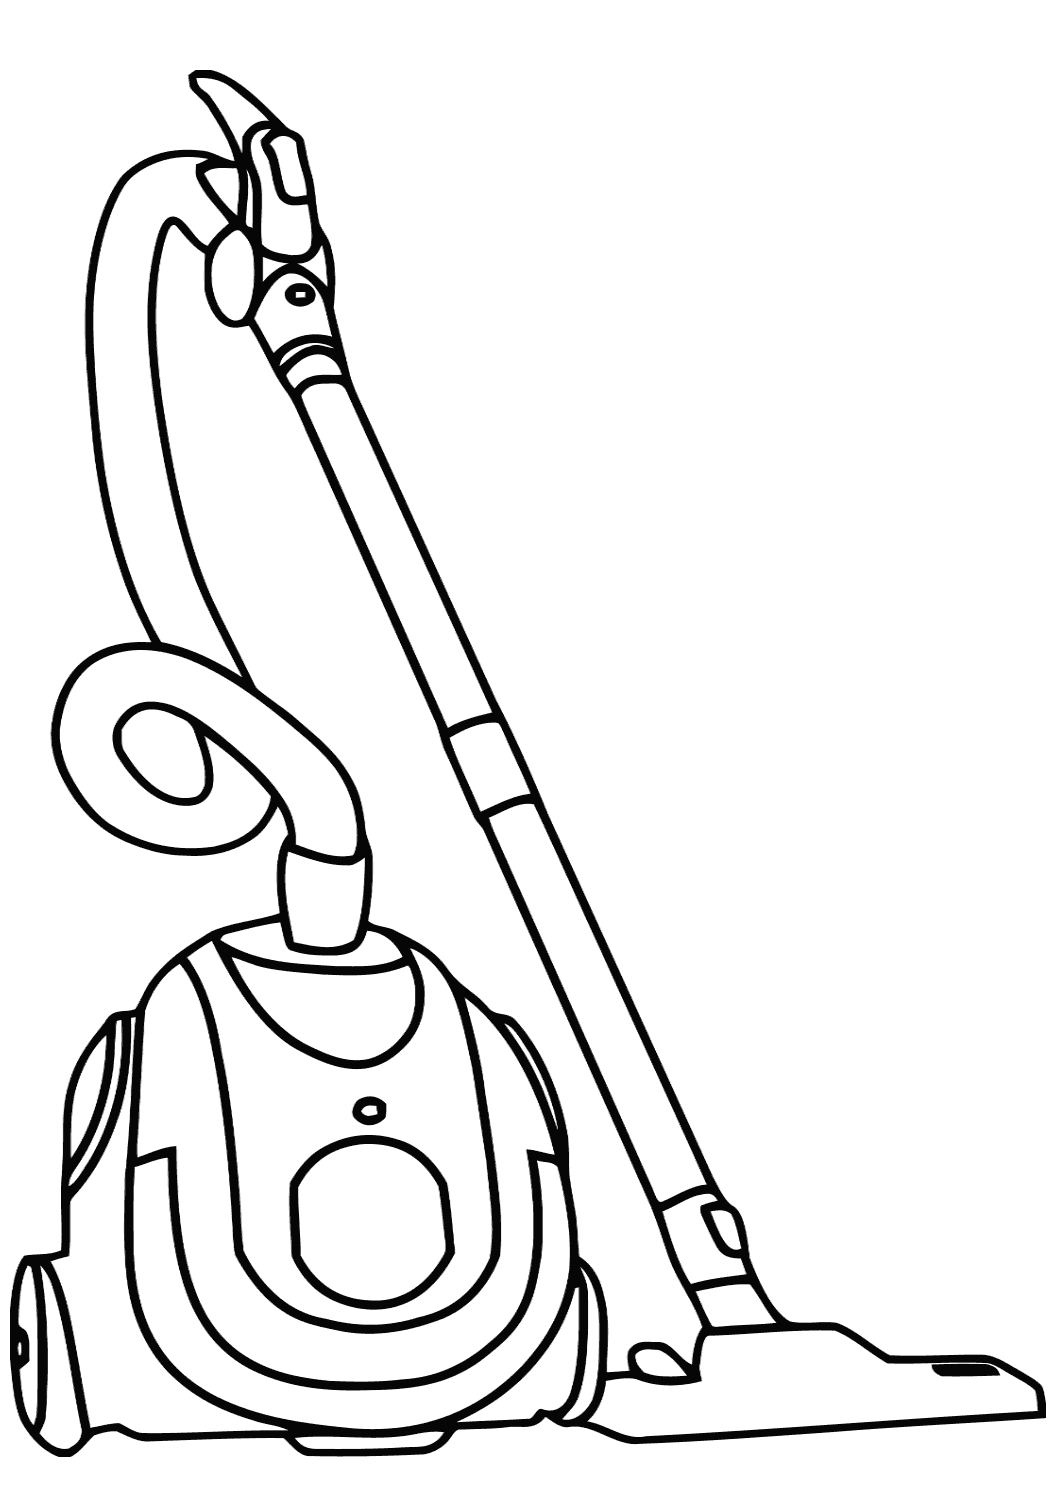 Vacuum cleaner coloring pages ...coloringway.com